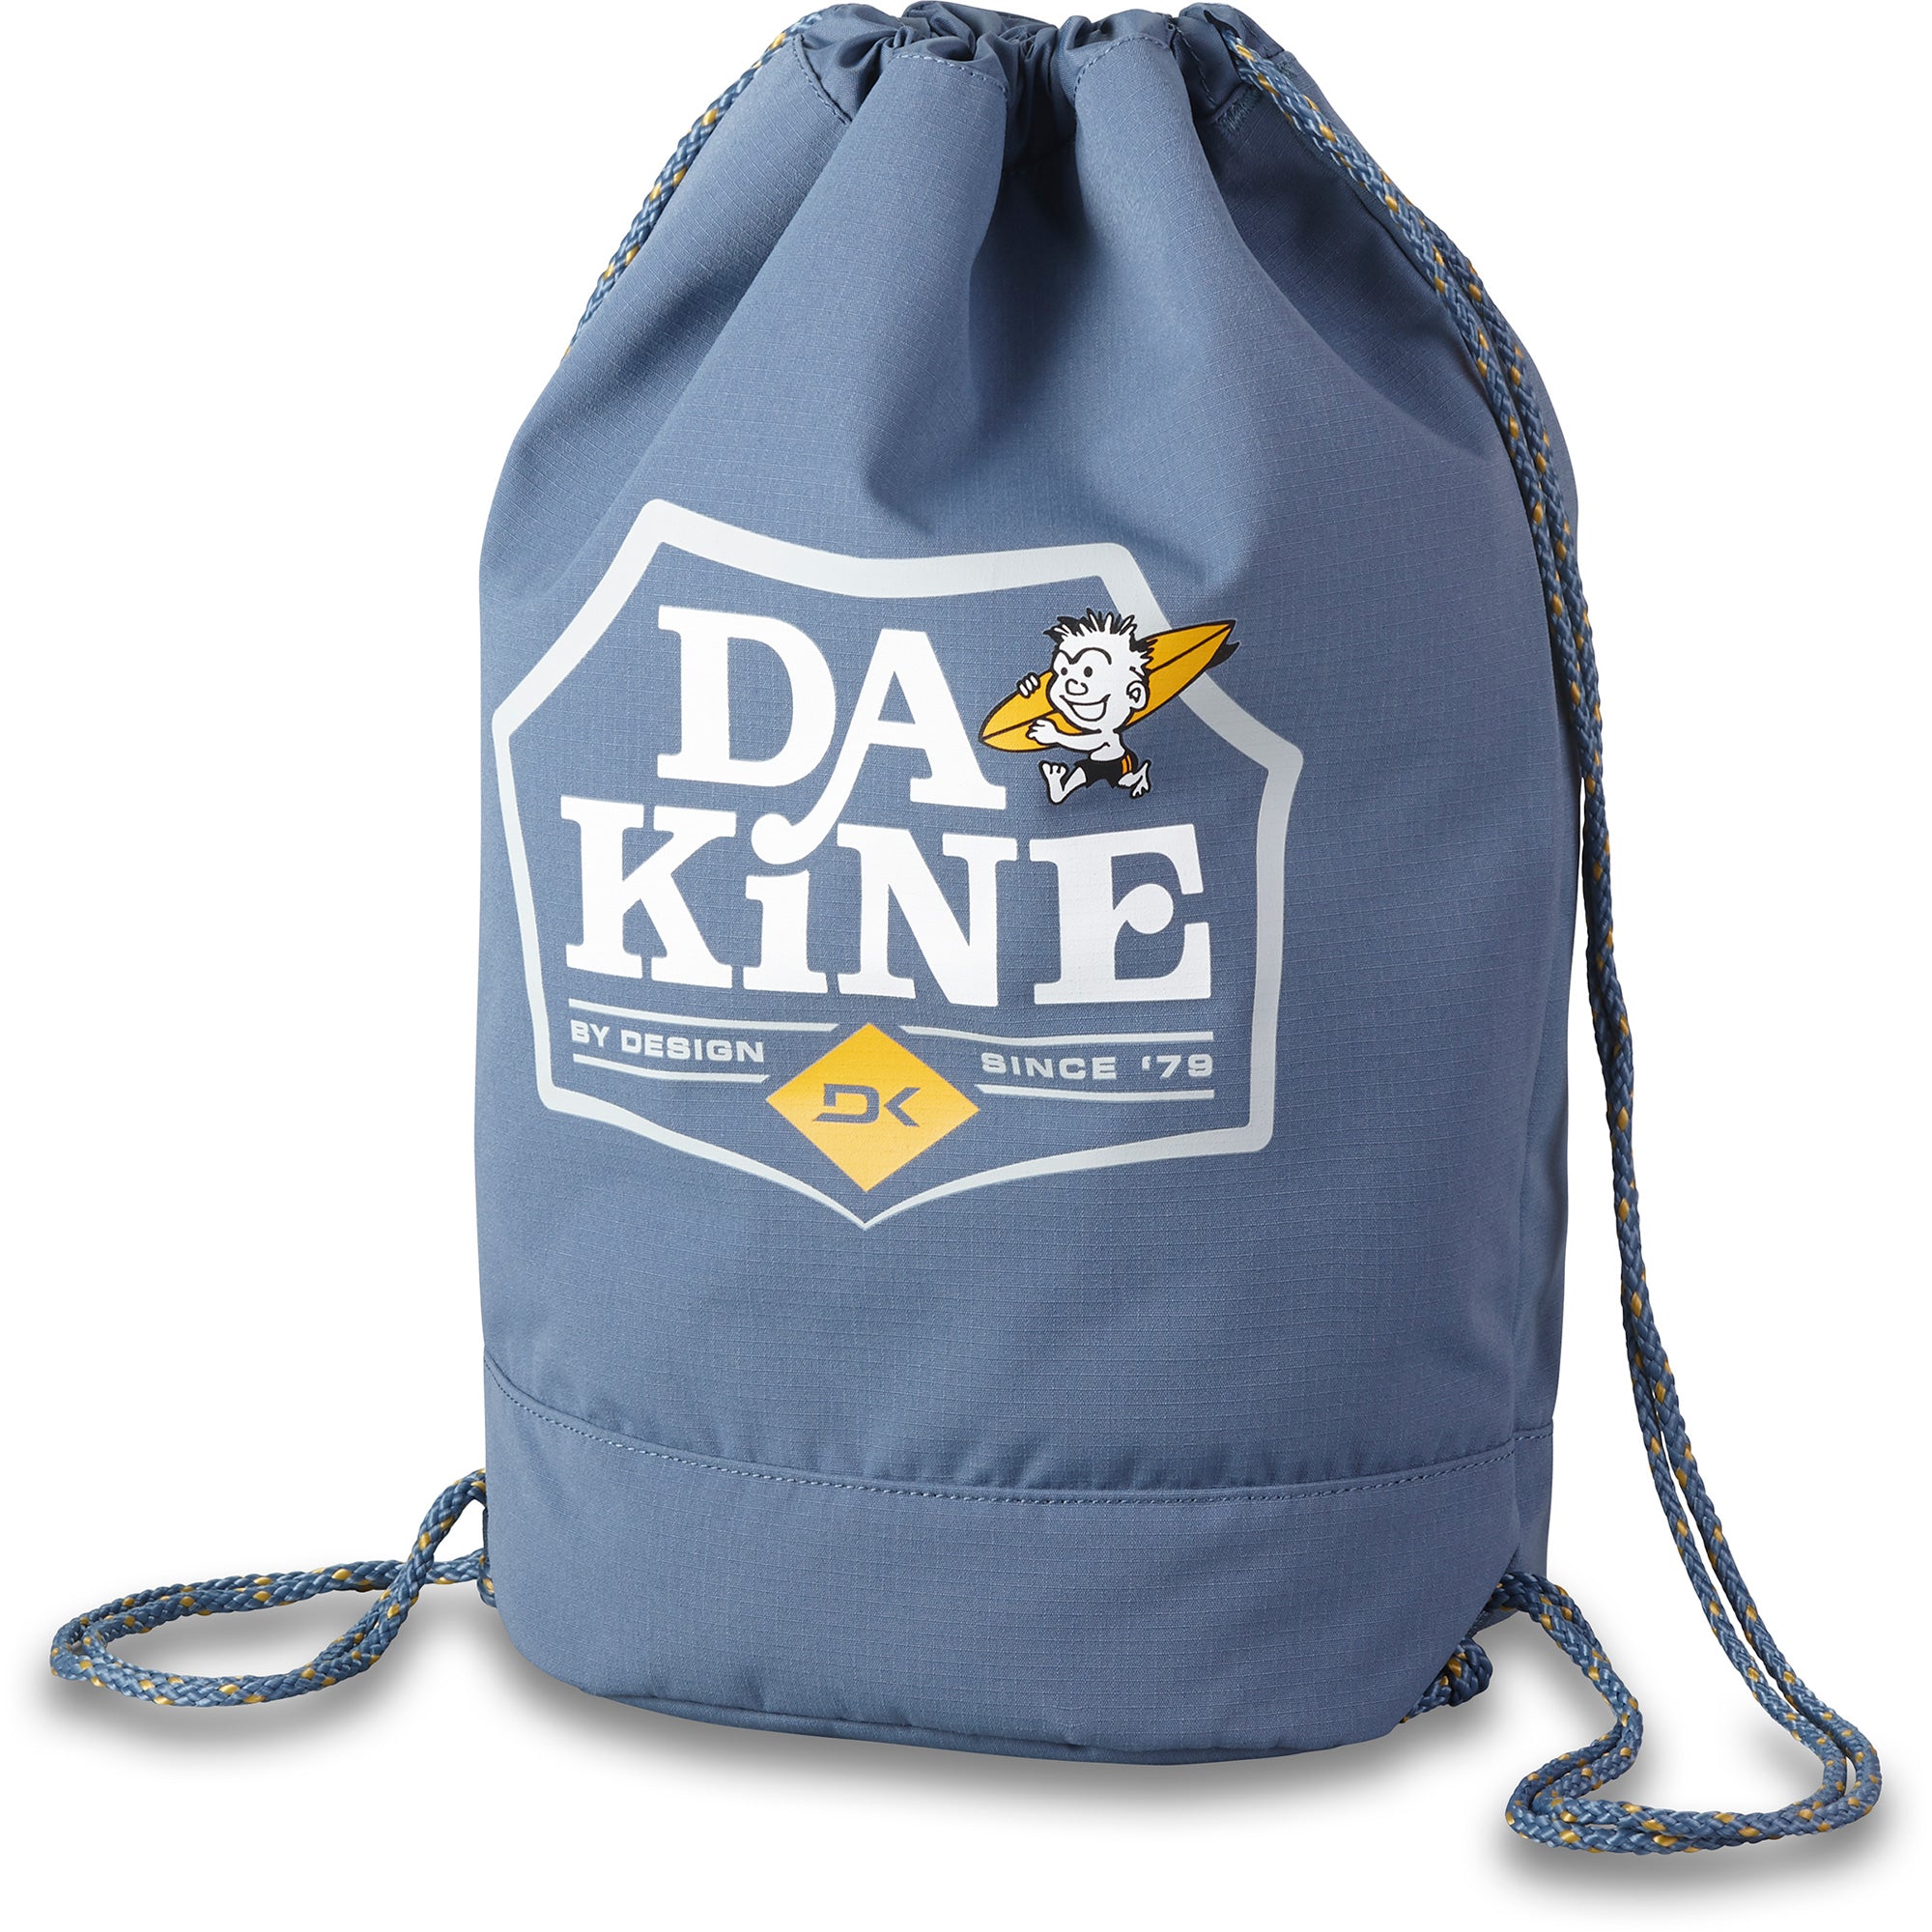 Economy Drawstring Cinch Pack Backpack - 13 W x 16 H - Kenny Products